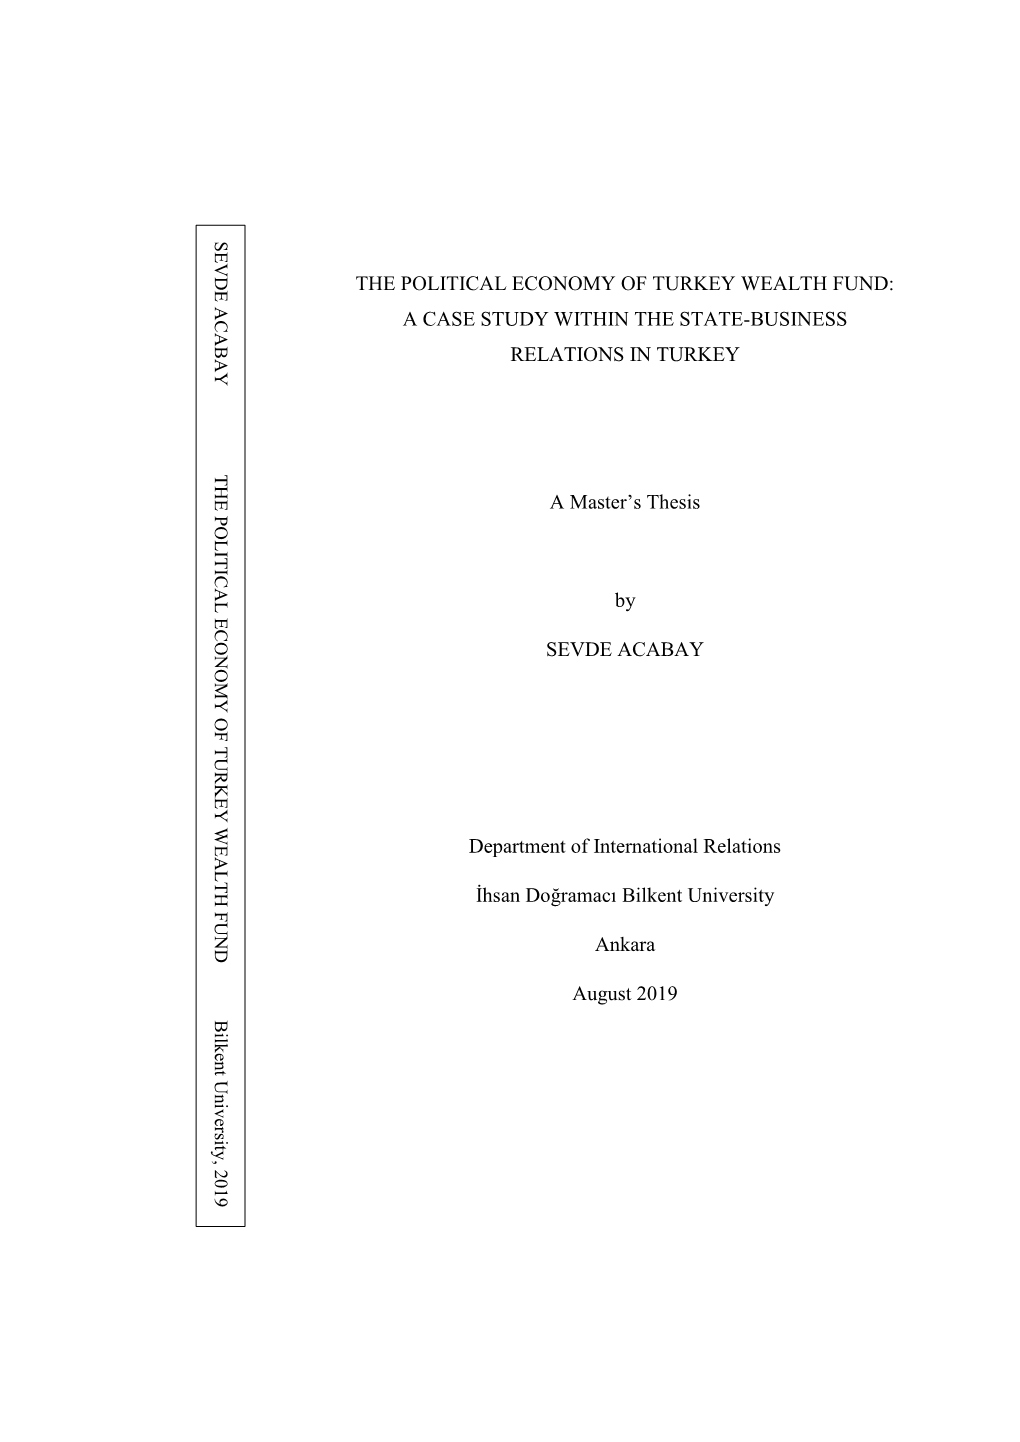 The Political Economy of Turkey Wealth Fund: a Case Study Within the State-Business Relations in Turkey